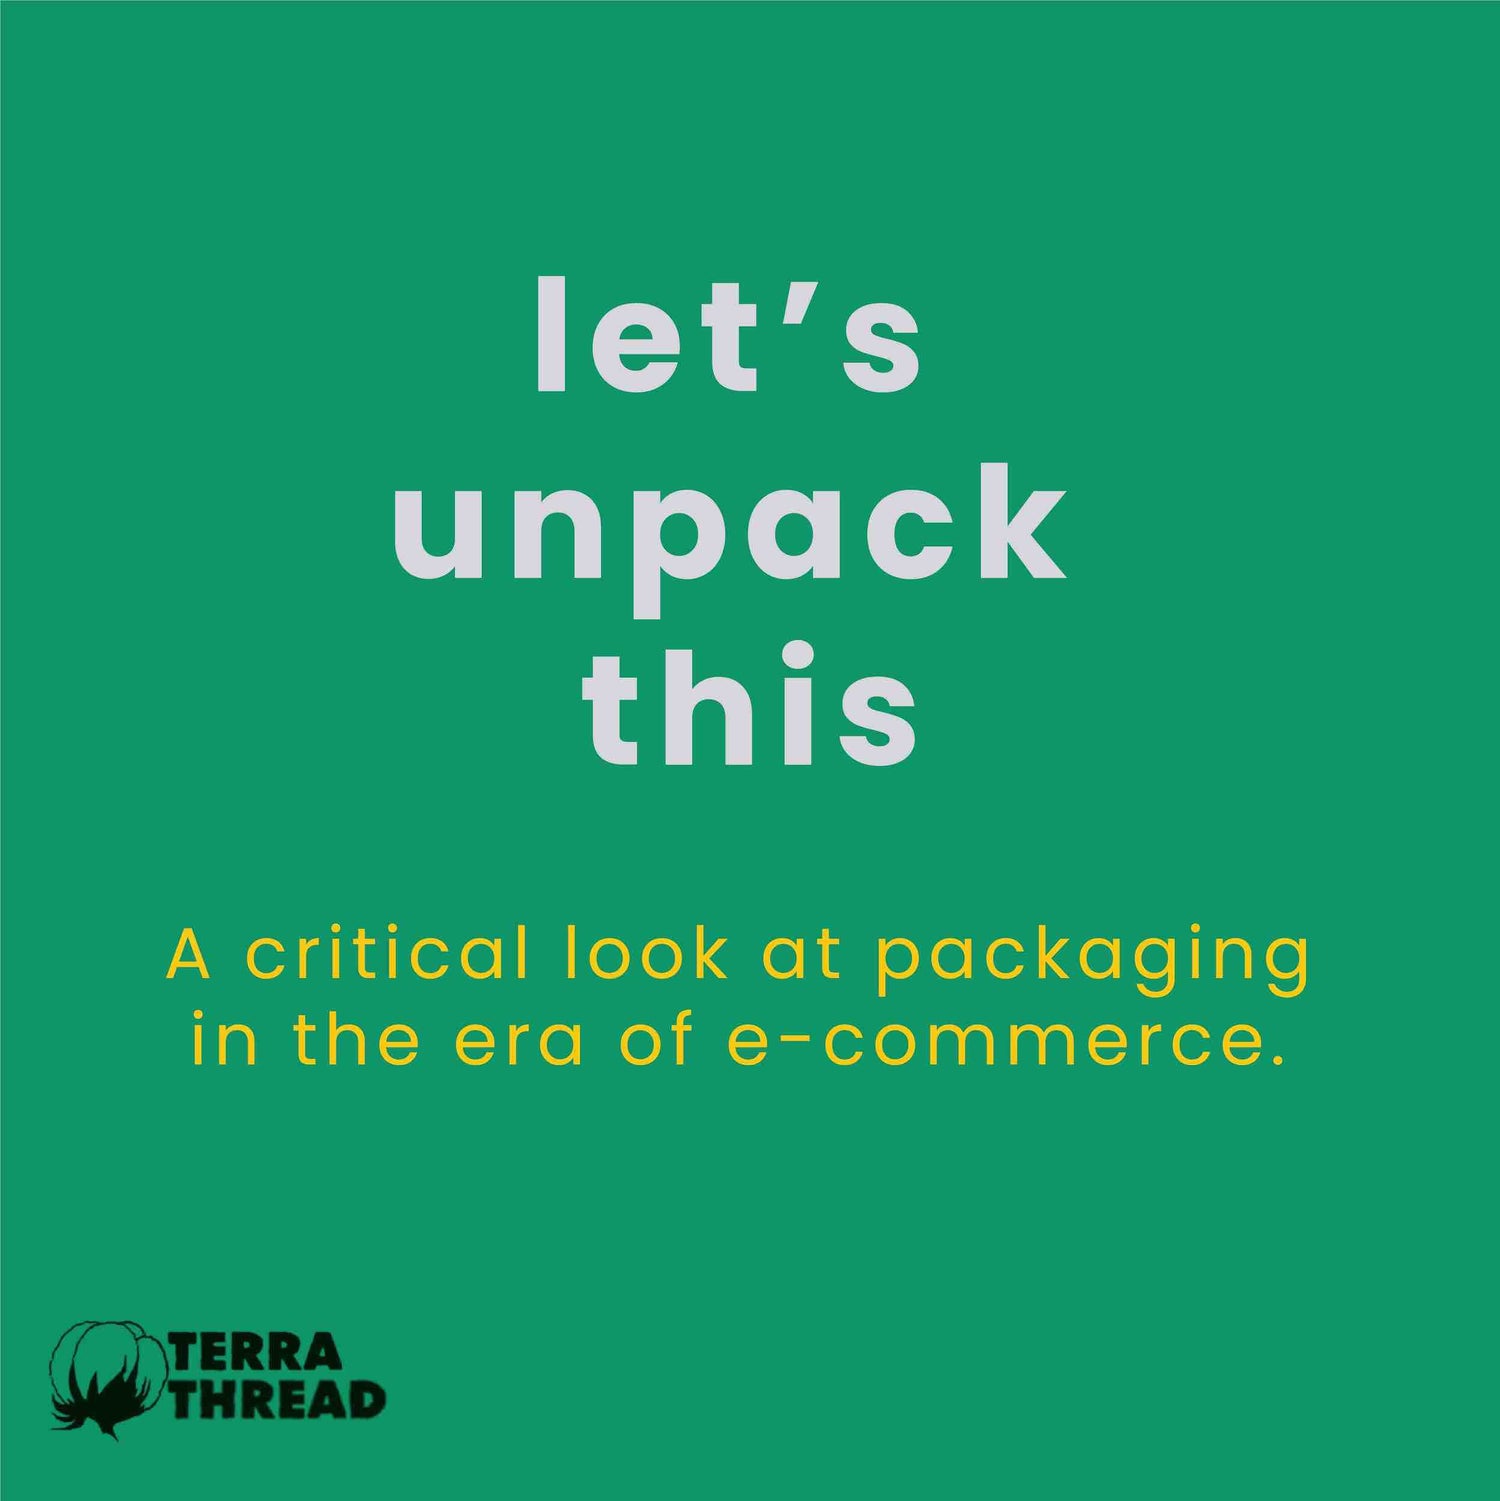 Sustainable and environmentally friendly packaging practices